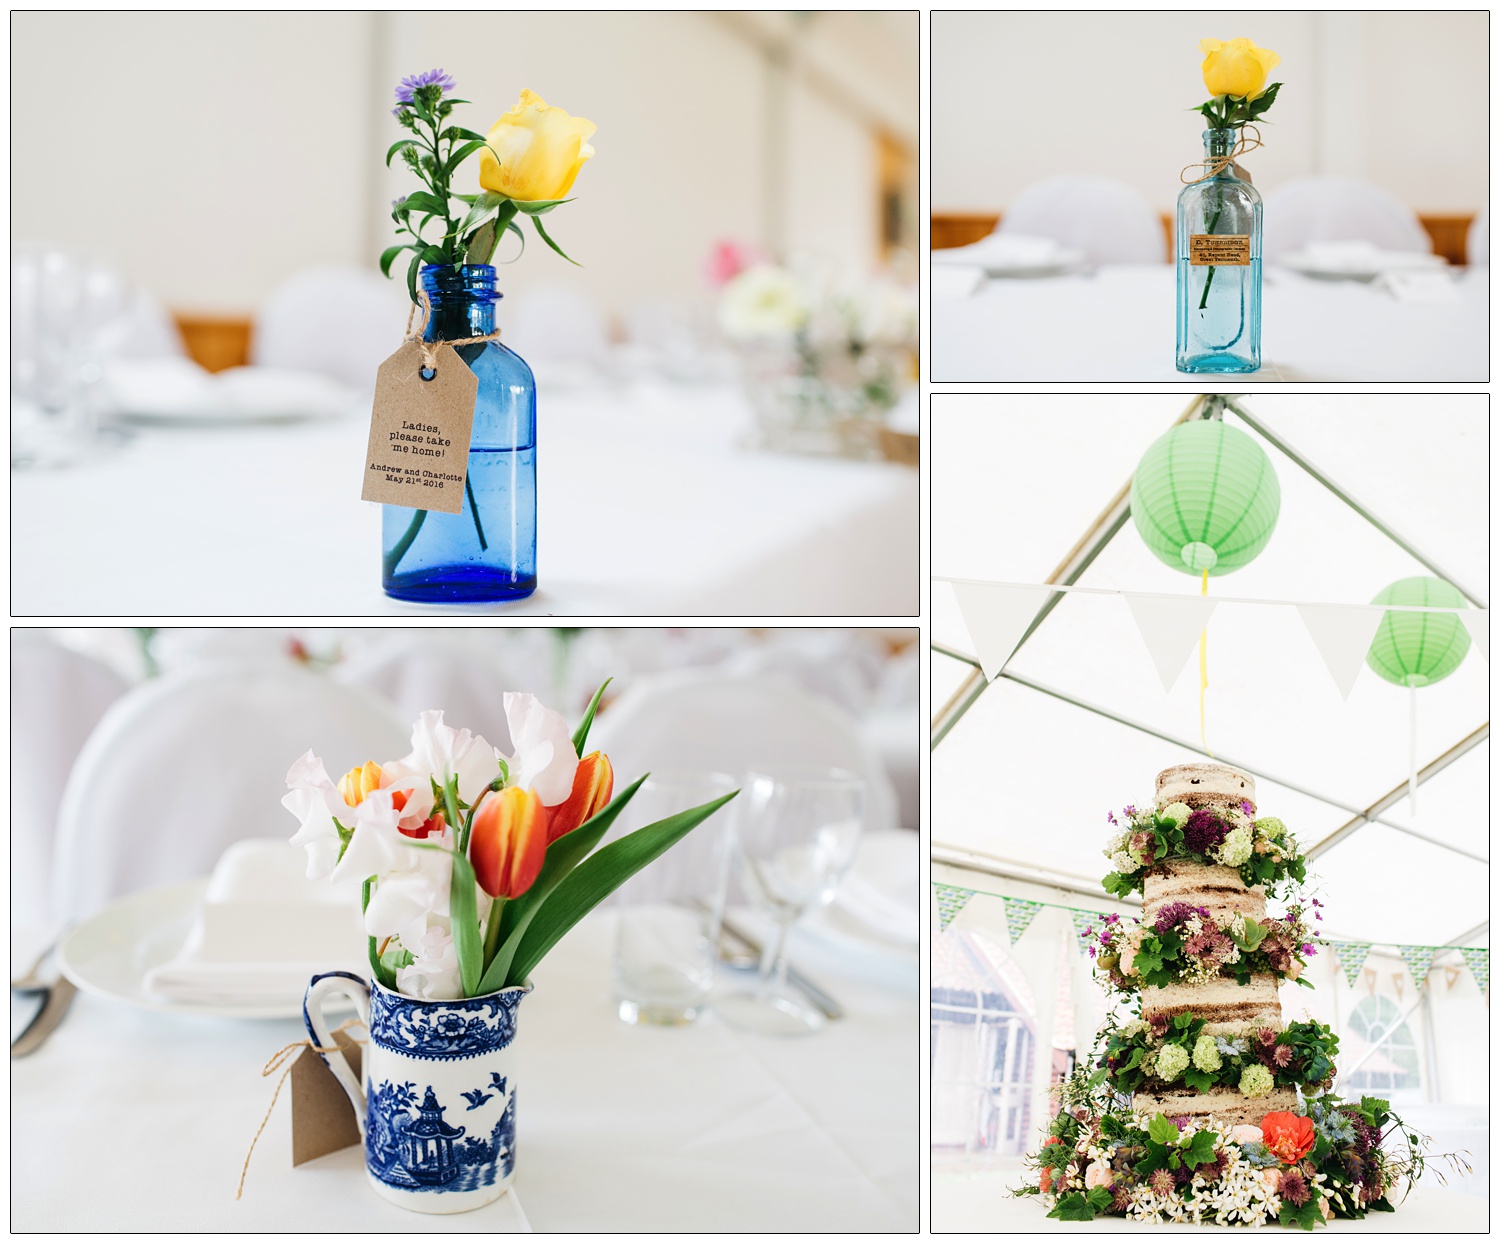 glass bottles and flowers and cake on wedding tables